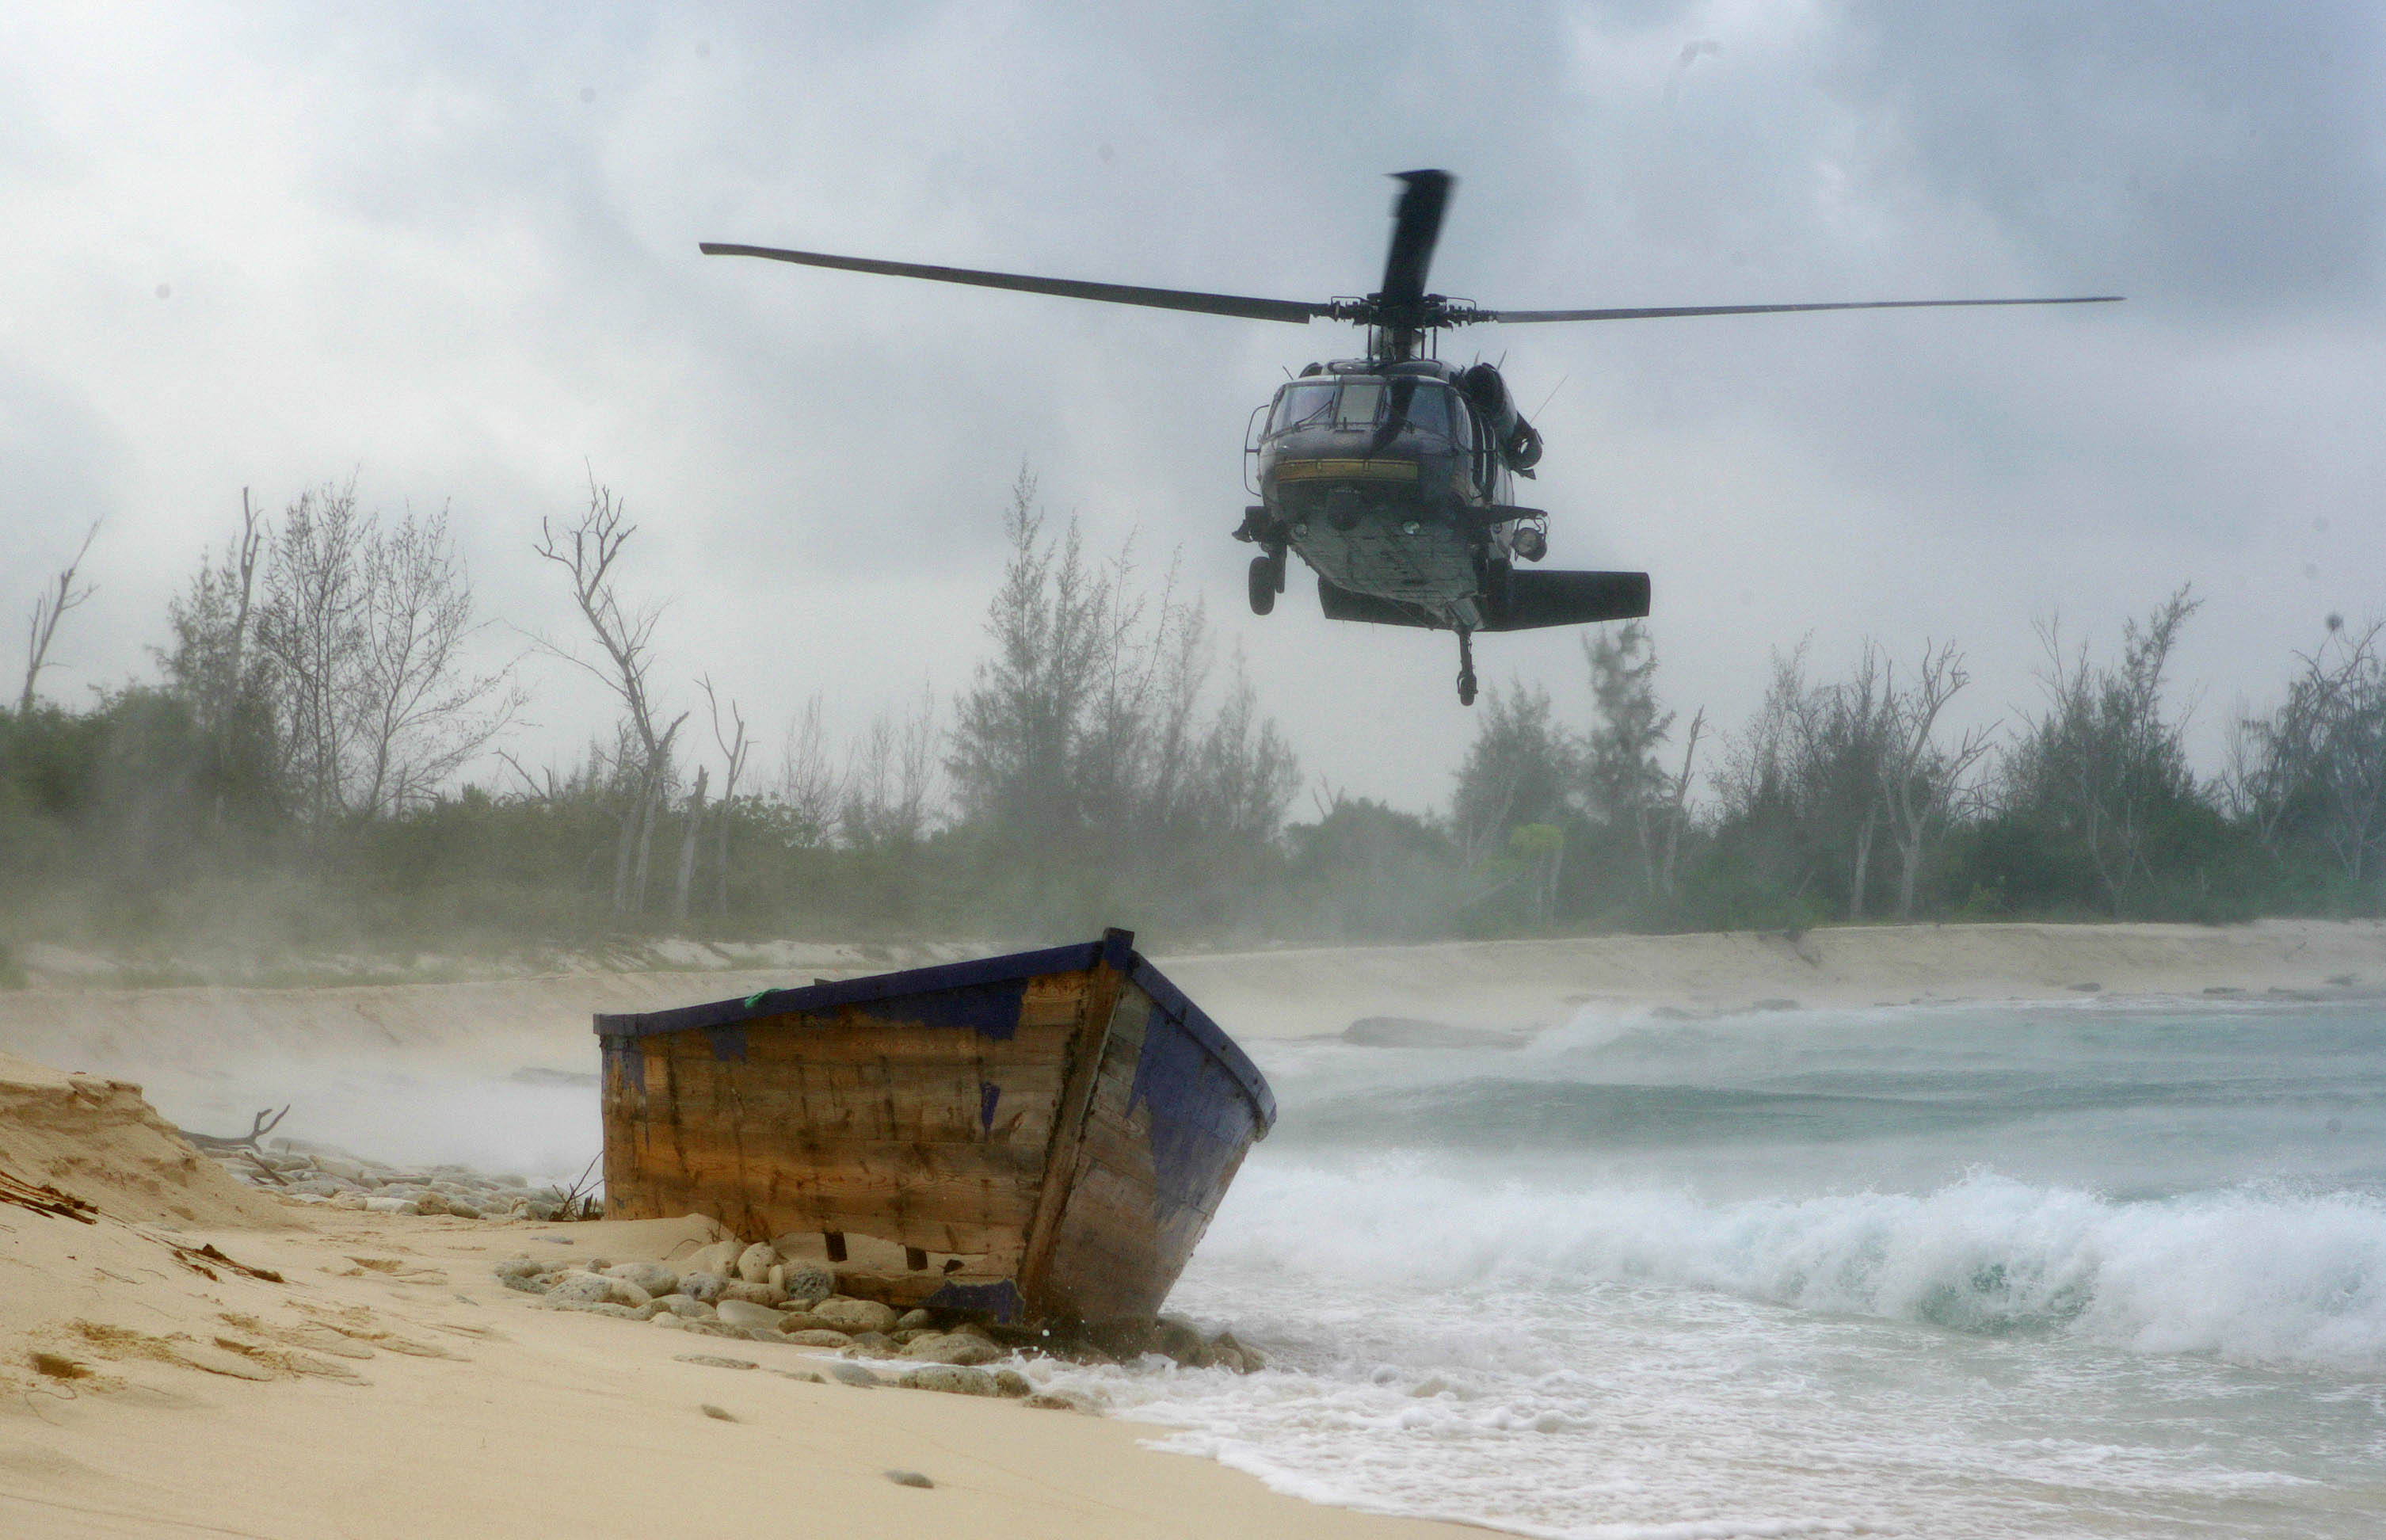 A CBP UH-60 Blackhawk helicopter flies over an island in Puerto Rico searching for people seeking asylum in the US.